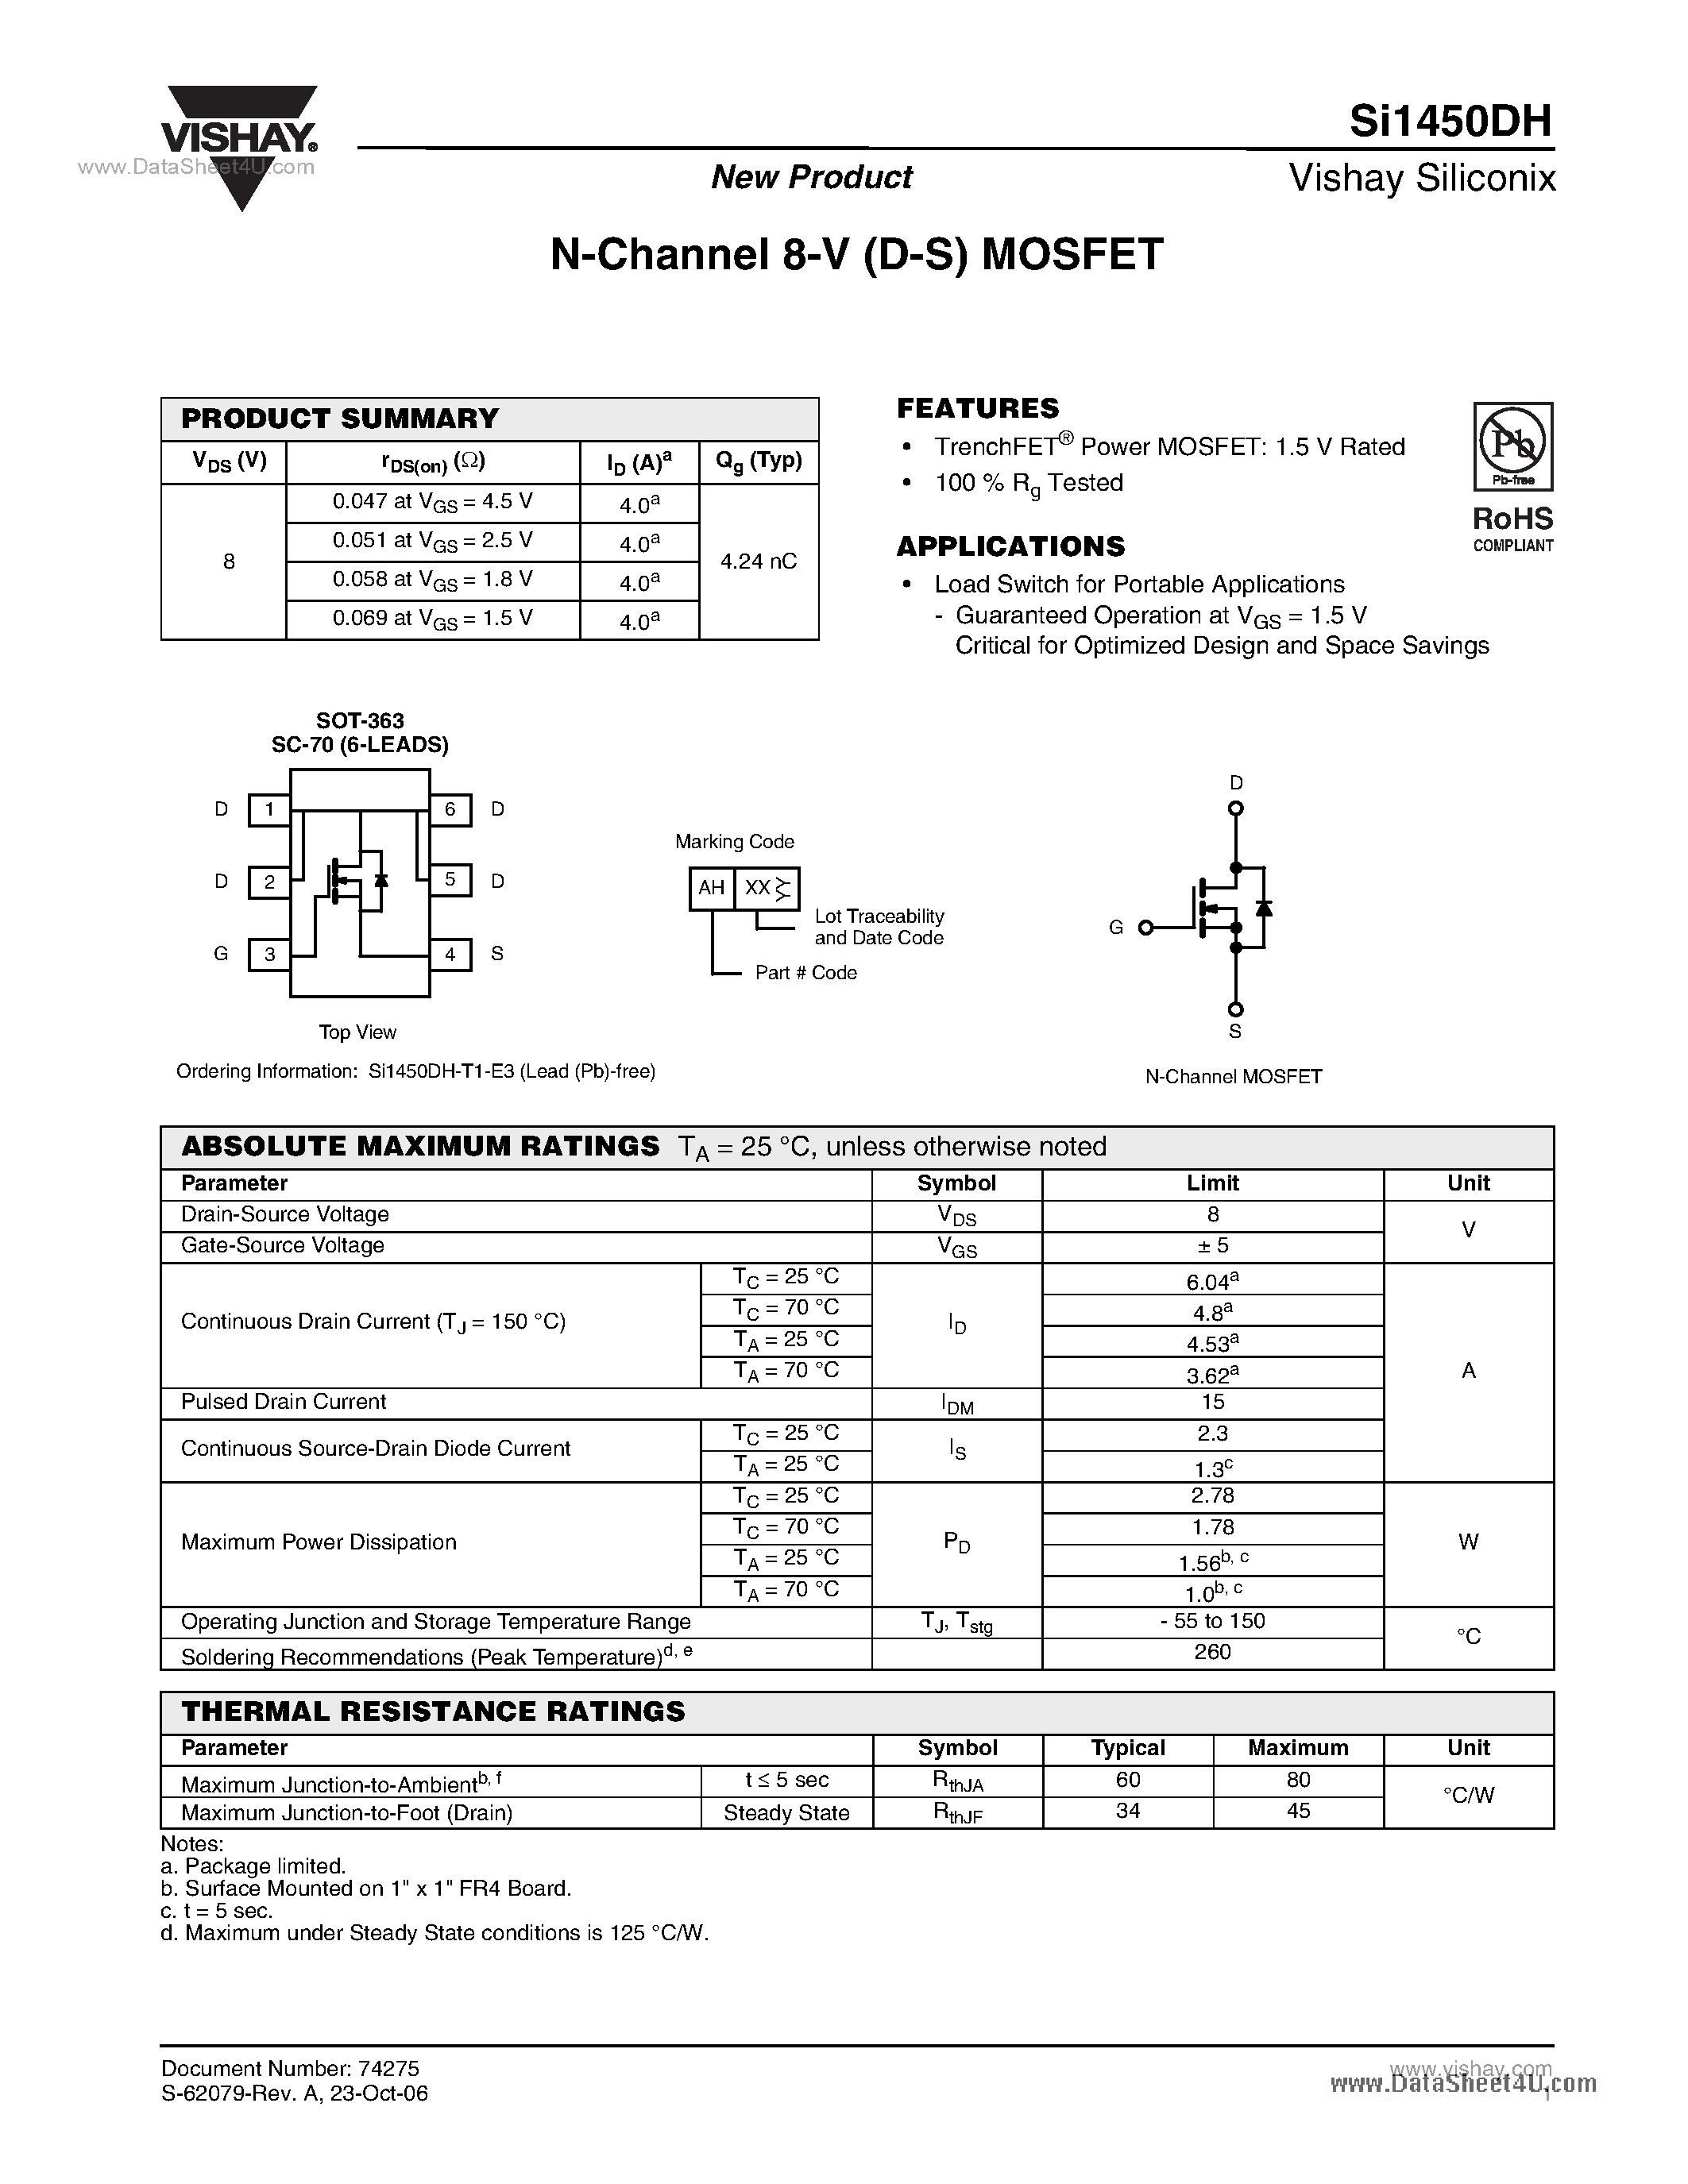 Datasheet SI1450DH - N-Channel 8-V (D-S) MOSFET page 1